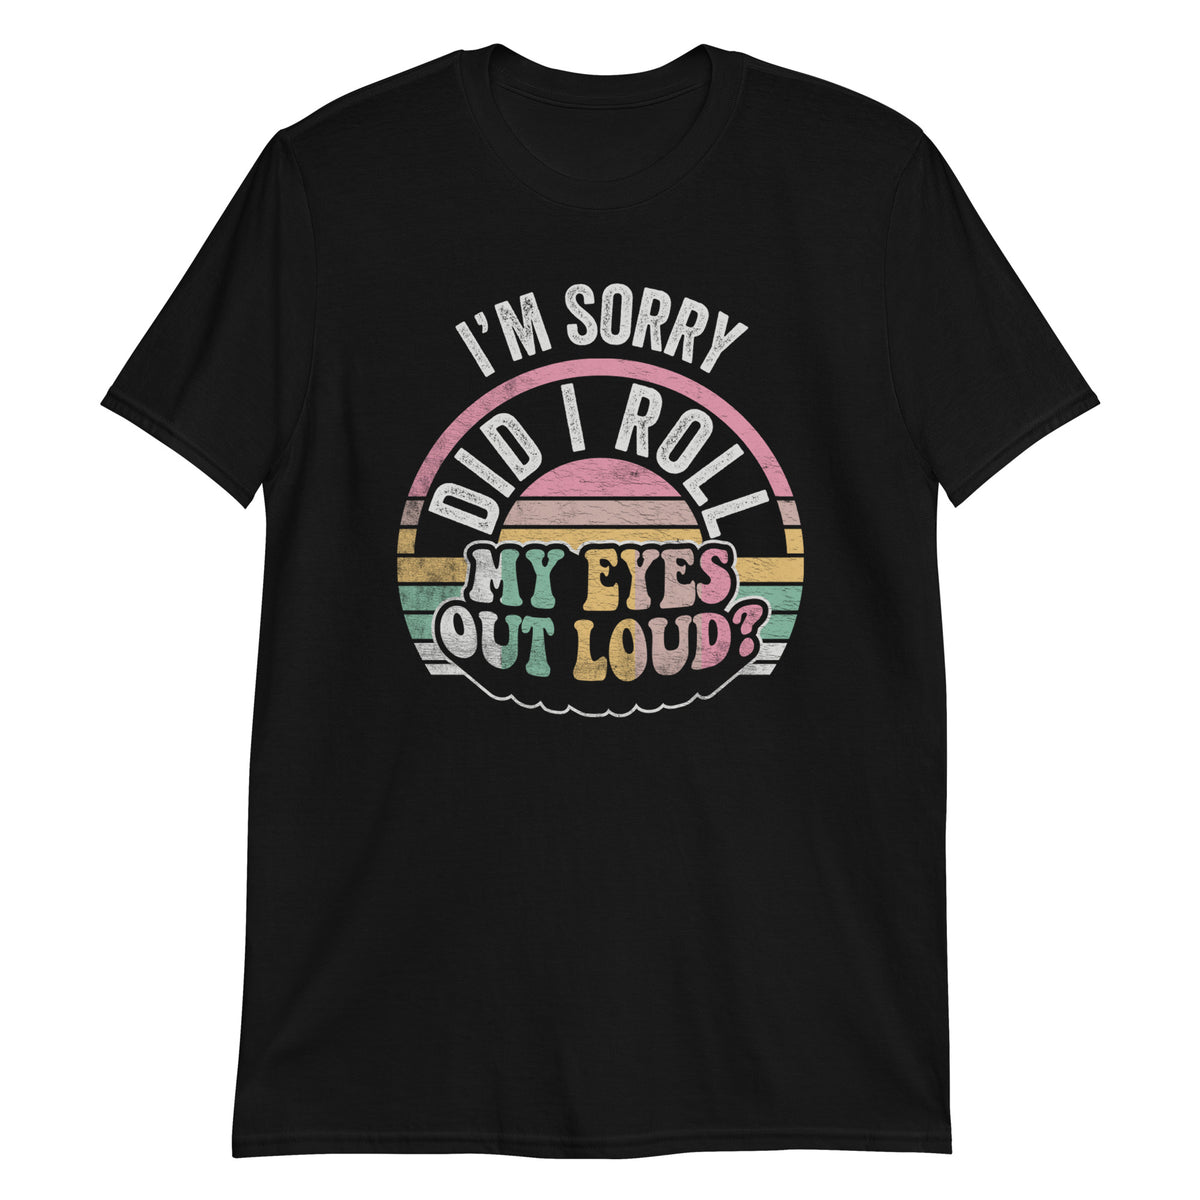 I'm Sorry Did I Roll My Eyes Out Loud, Funny Sarcastic Retro T-Shirt